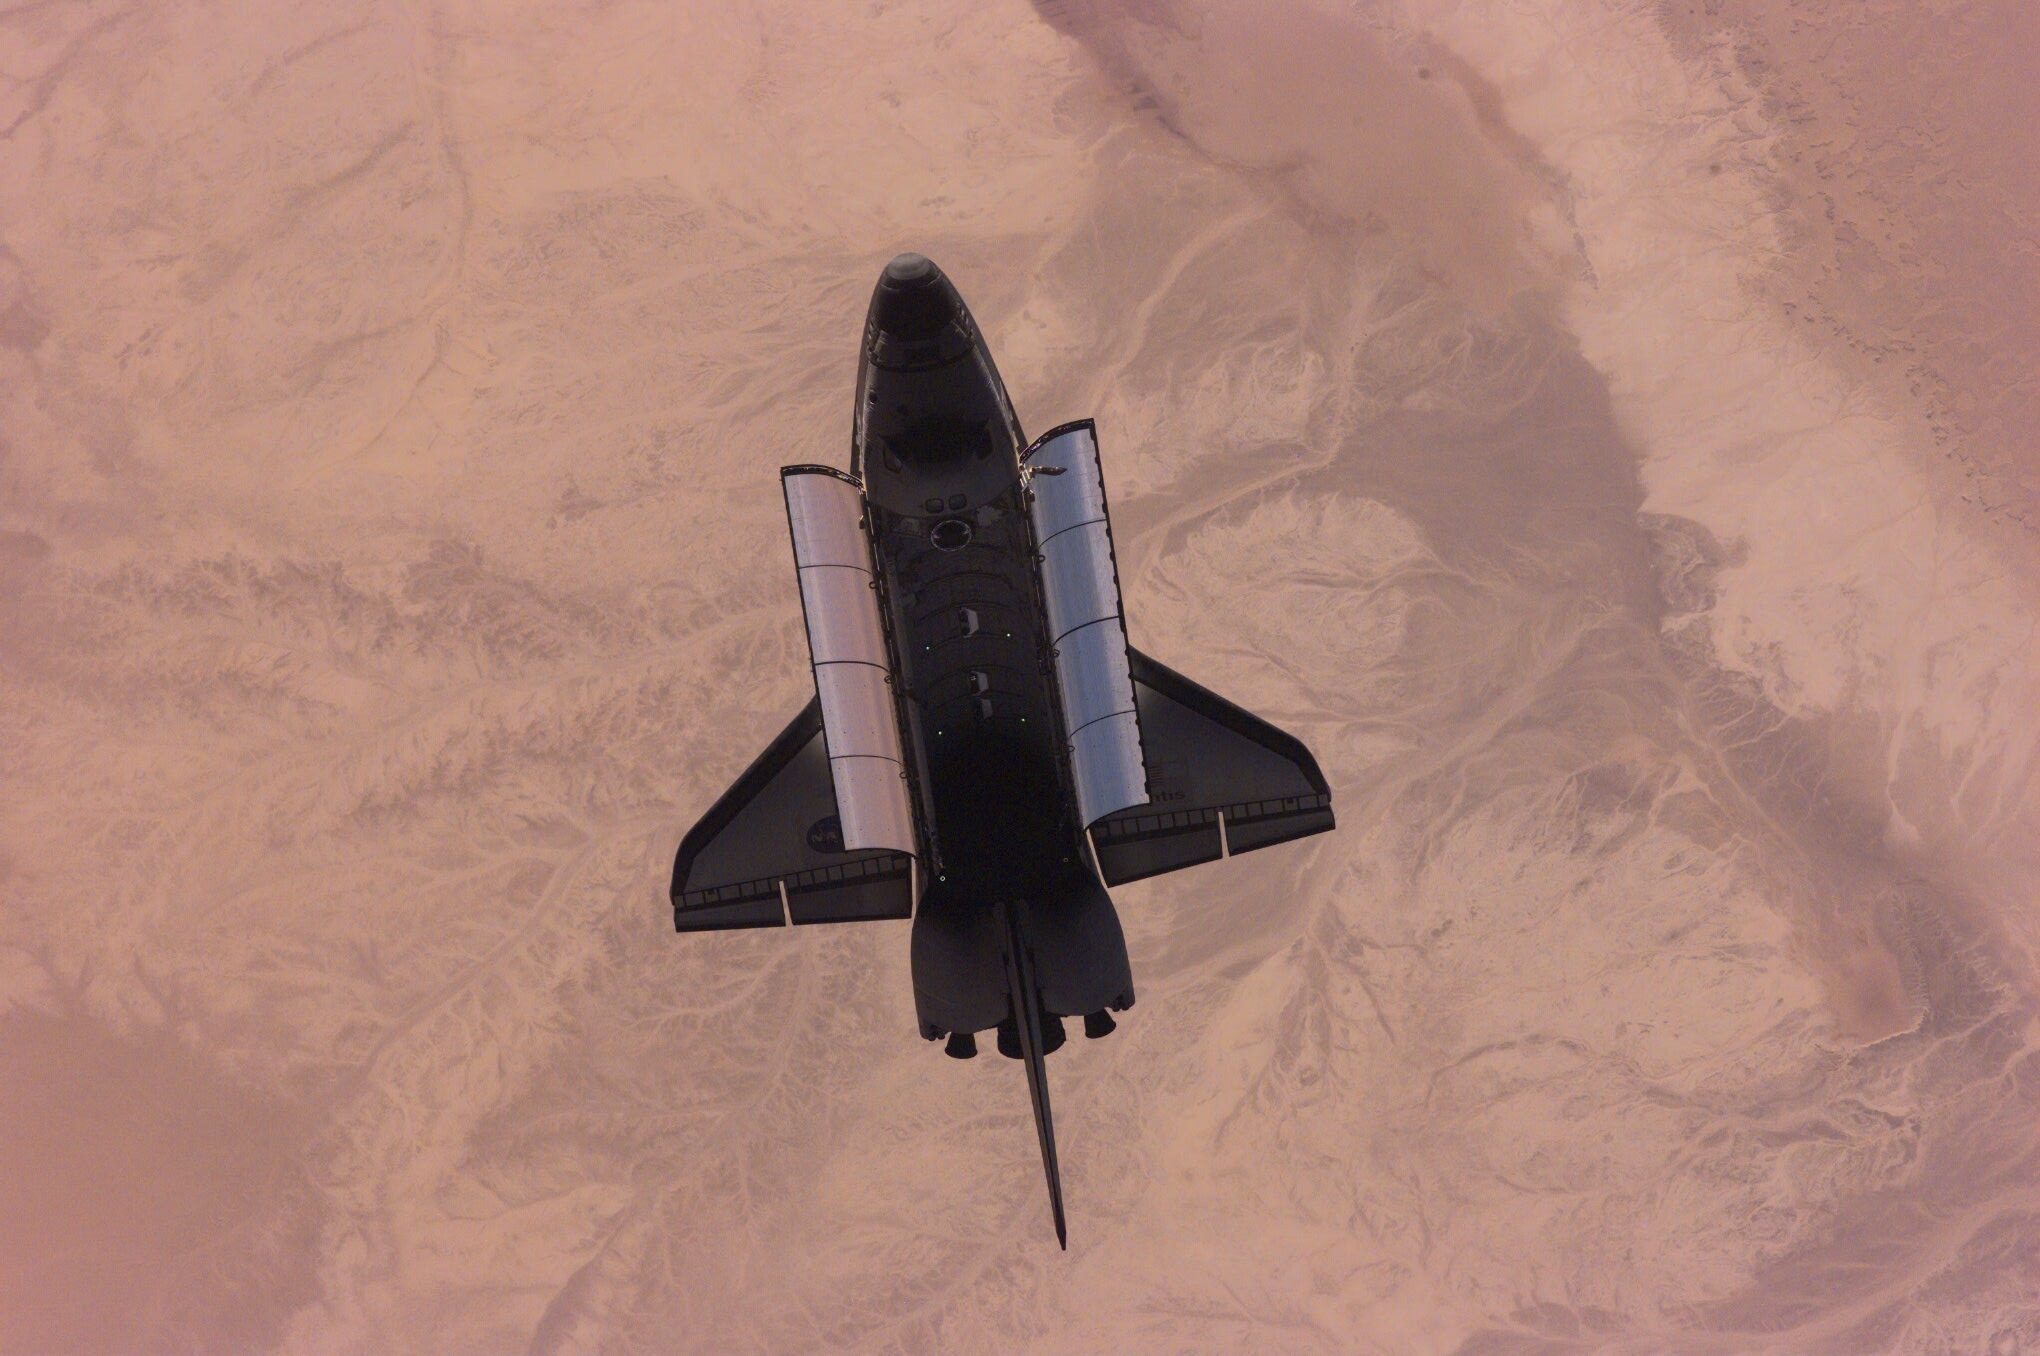 vehicles, space shuttle, space shuttles